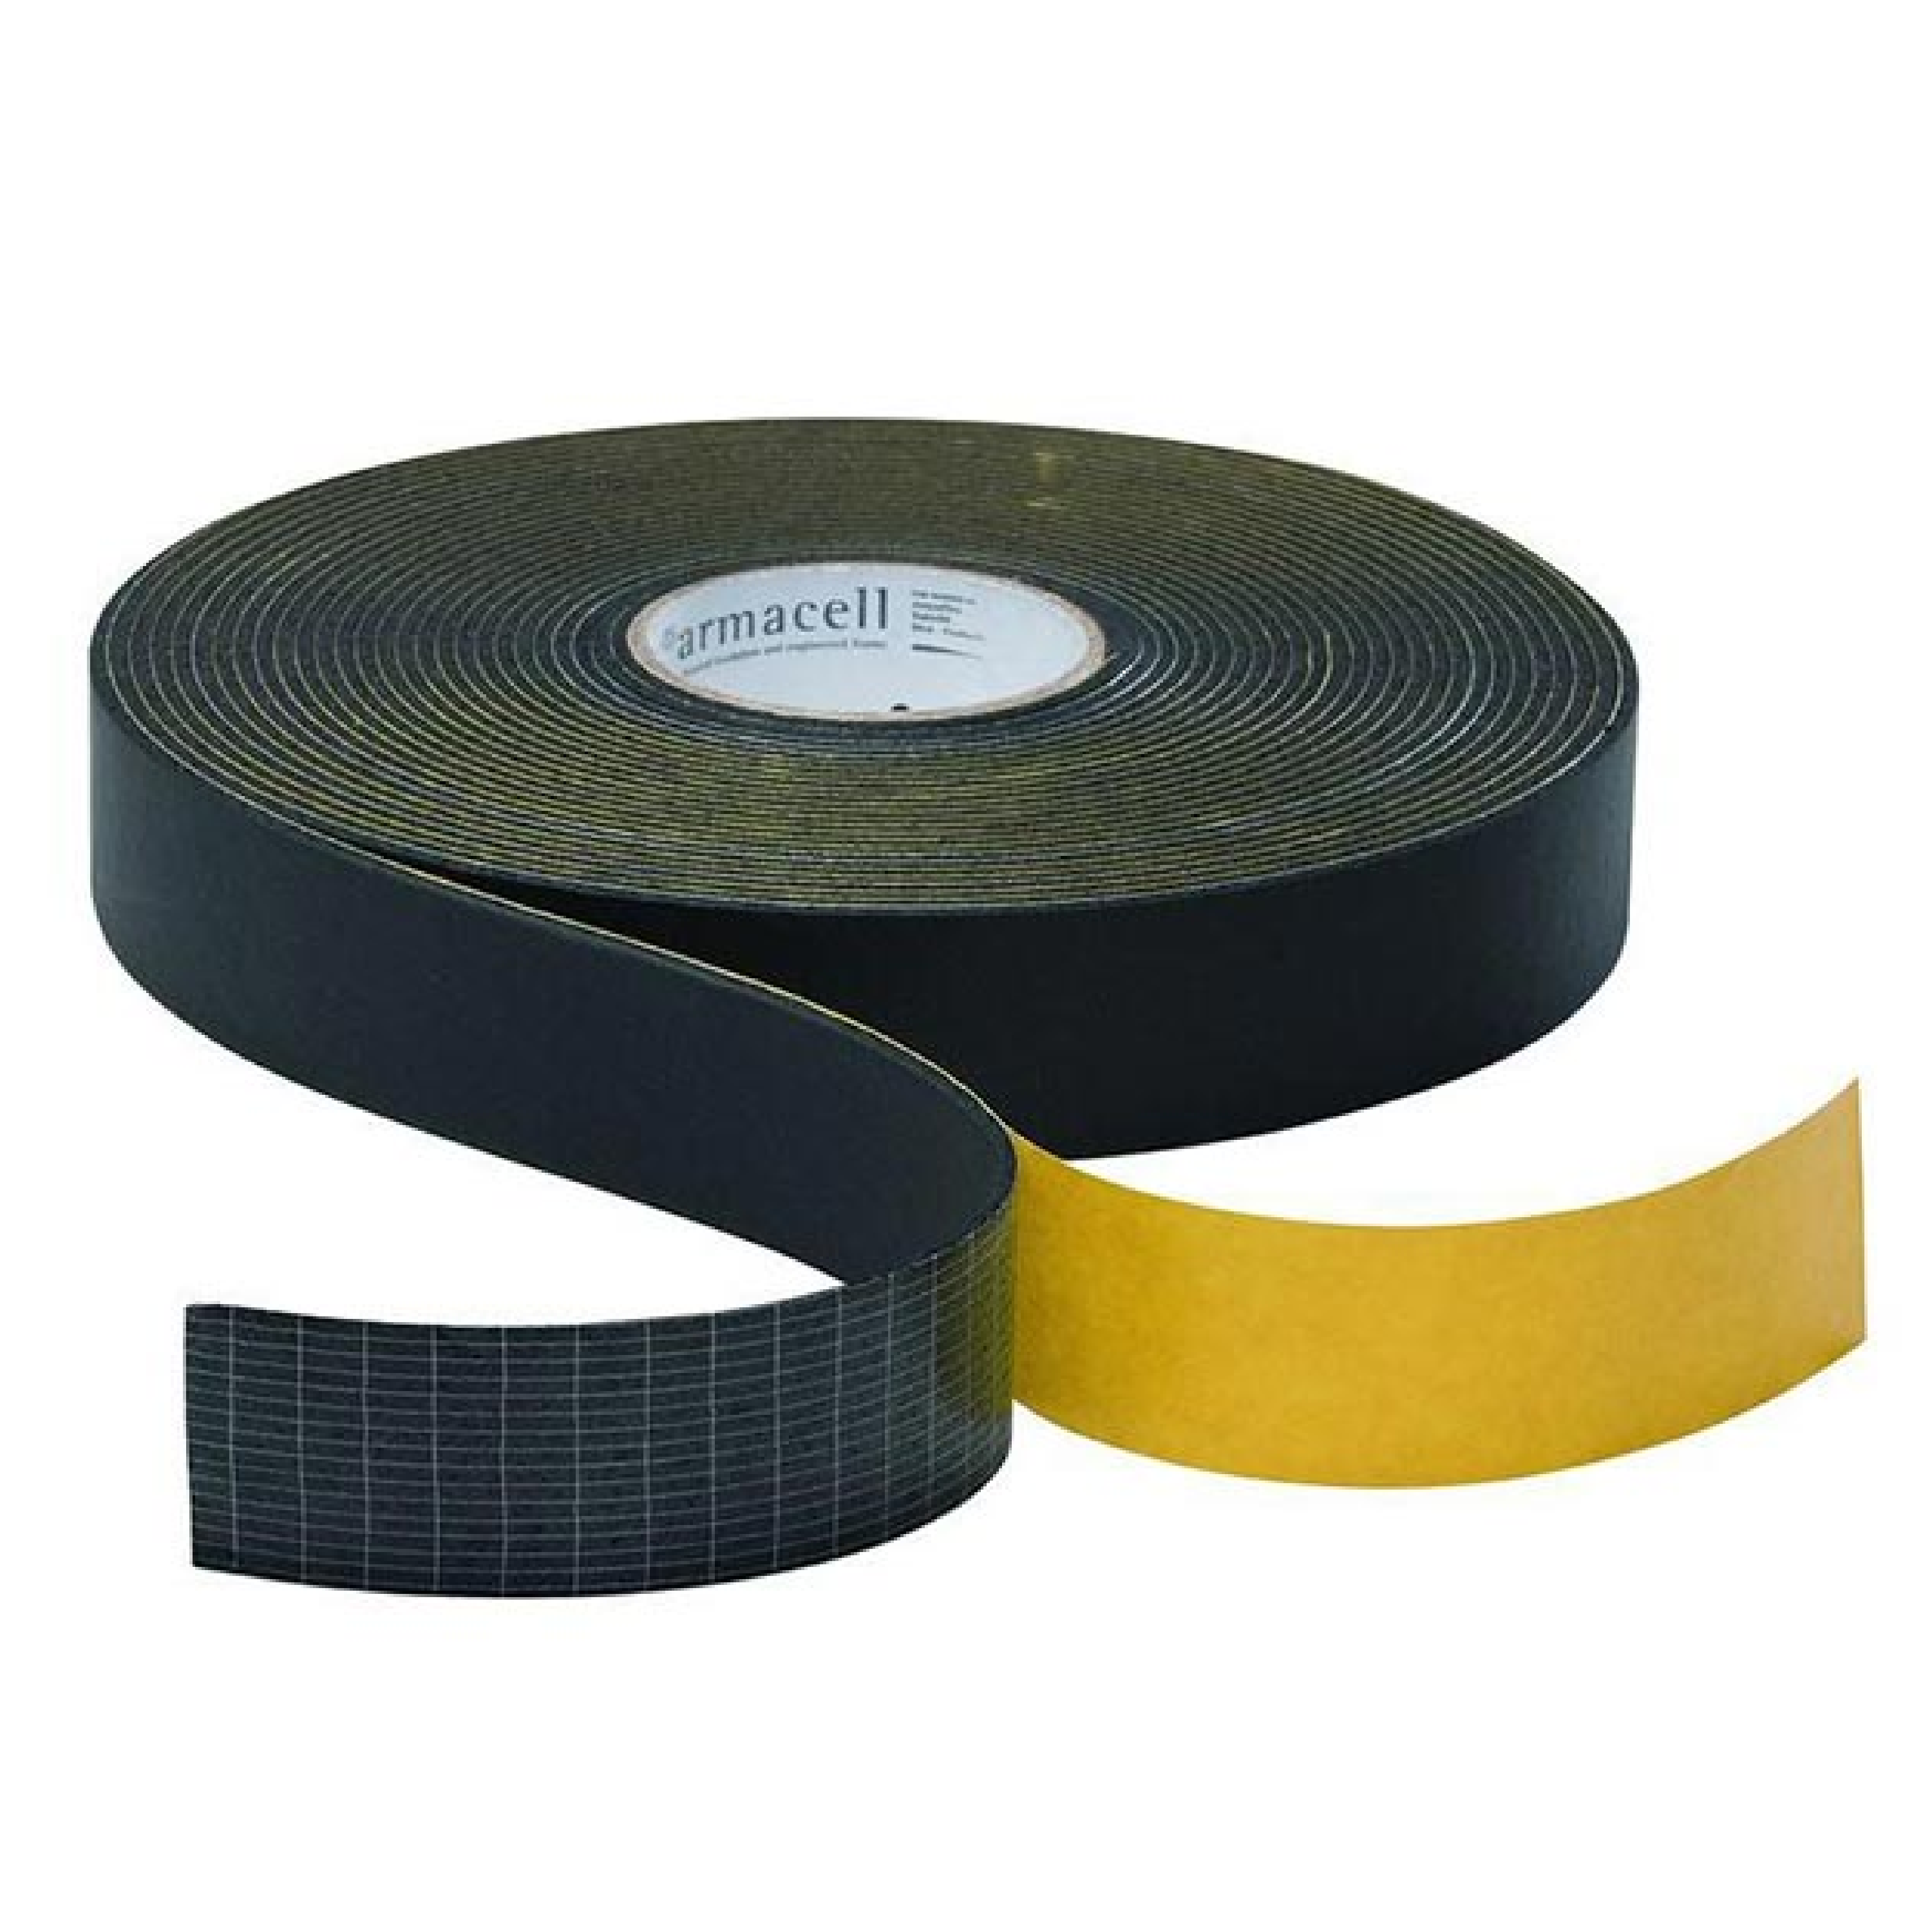 Armaflex Self-Adhesive INSULATION FOAM TAPE 2in X 30ft X 3MM THICK